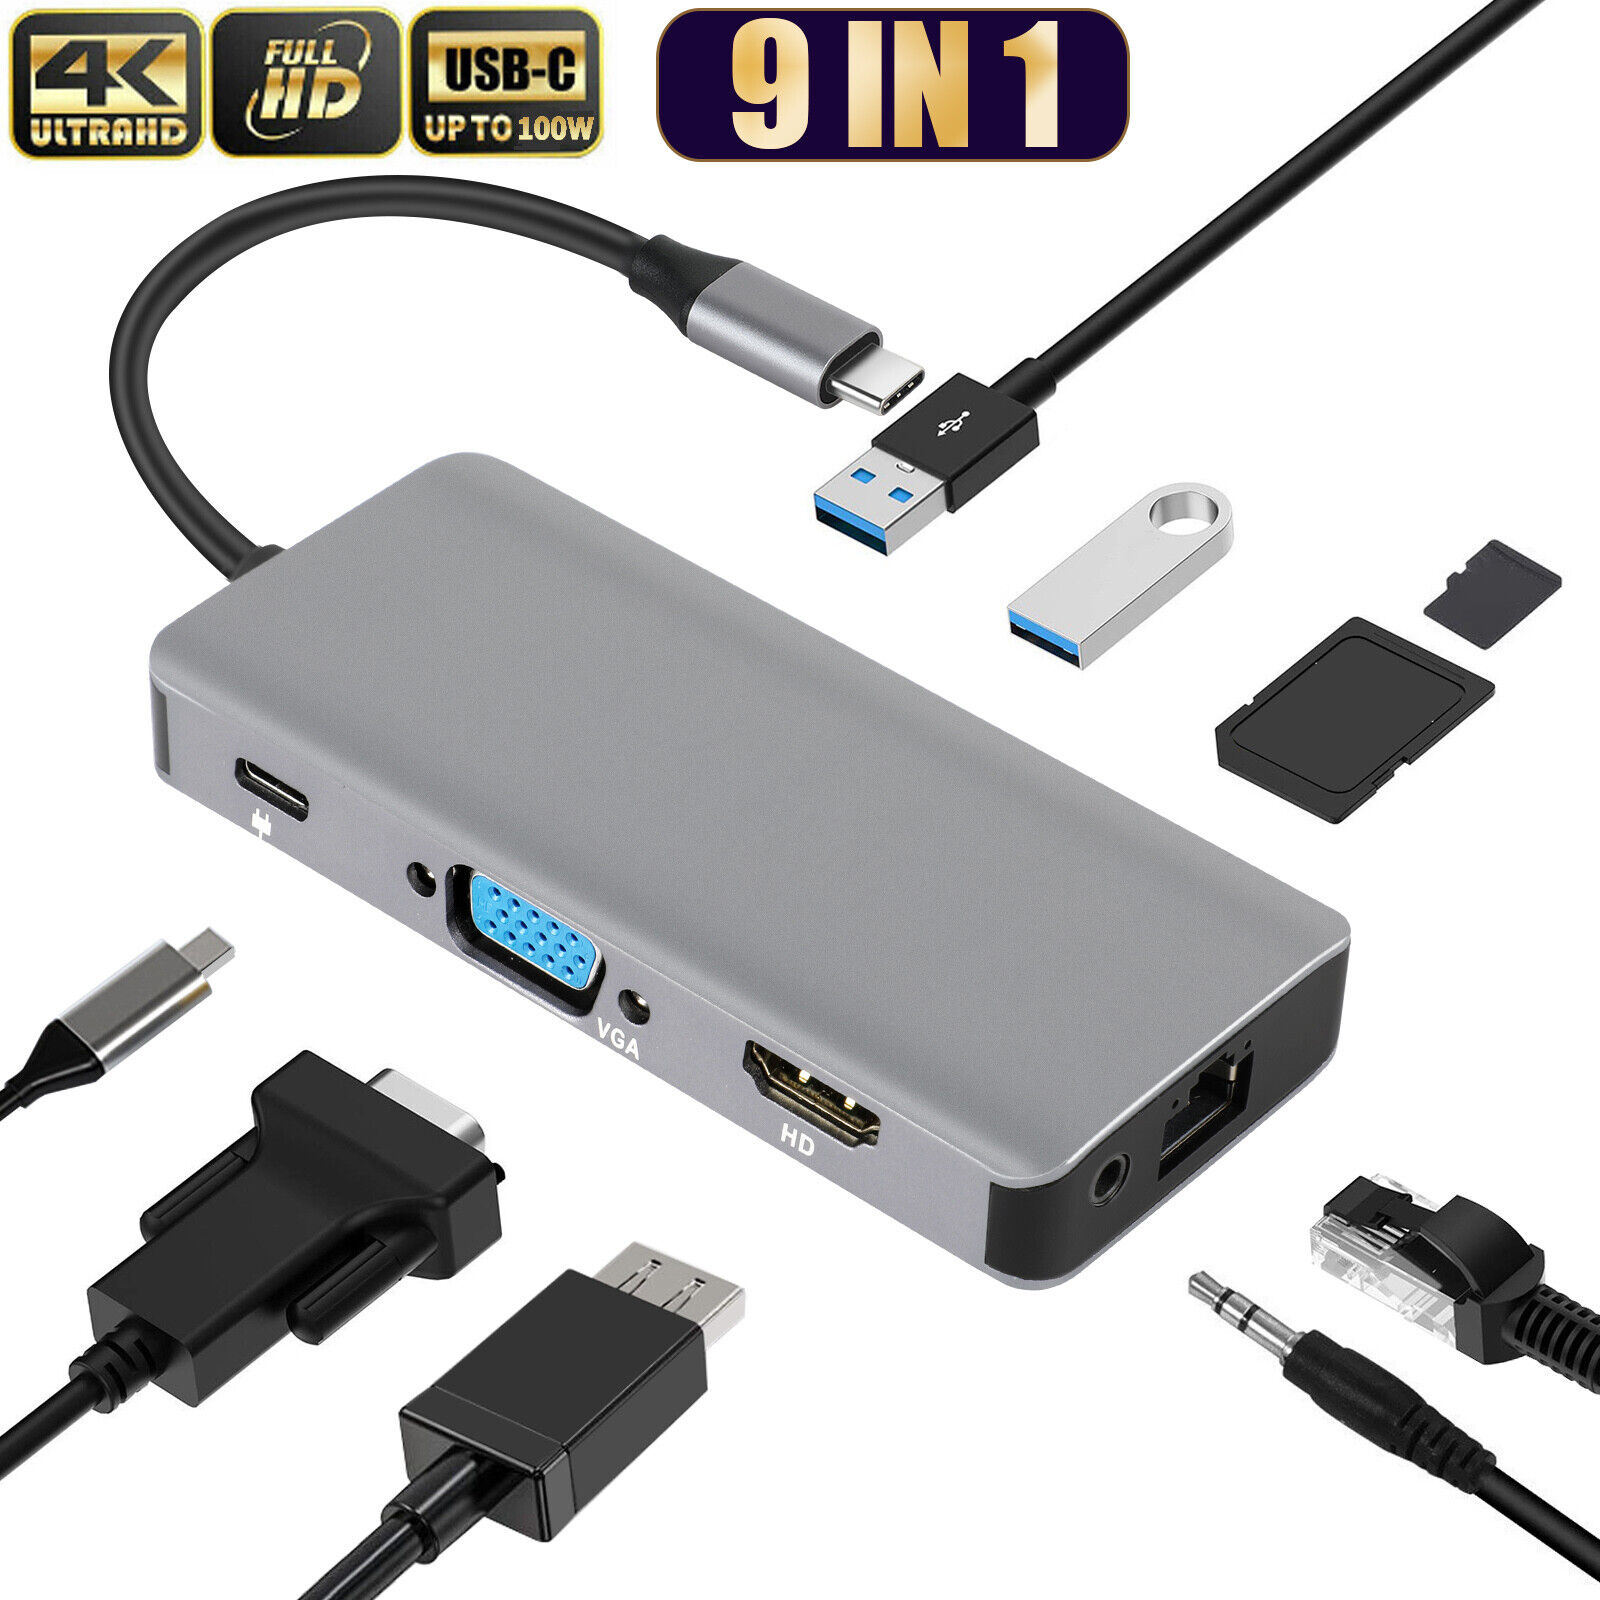 9 in 1 Multiport HUB Type-C to 4K HDMI VGA USB 3.0 Adapter for PC Laptop Macbook